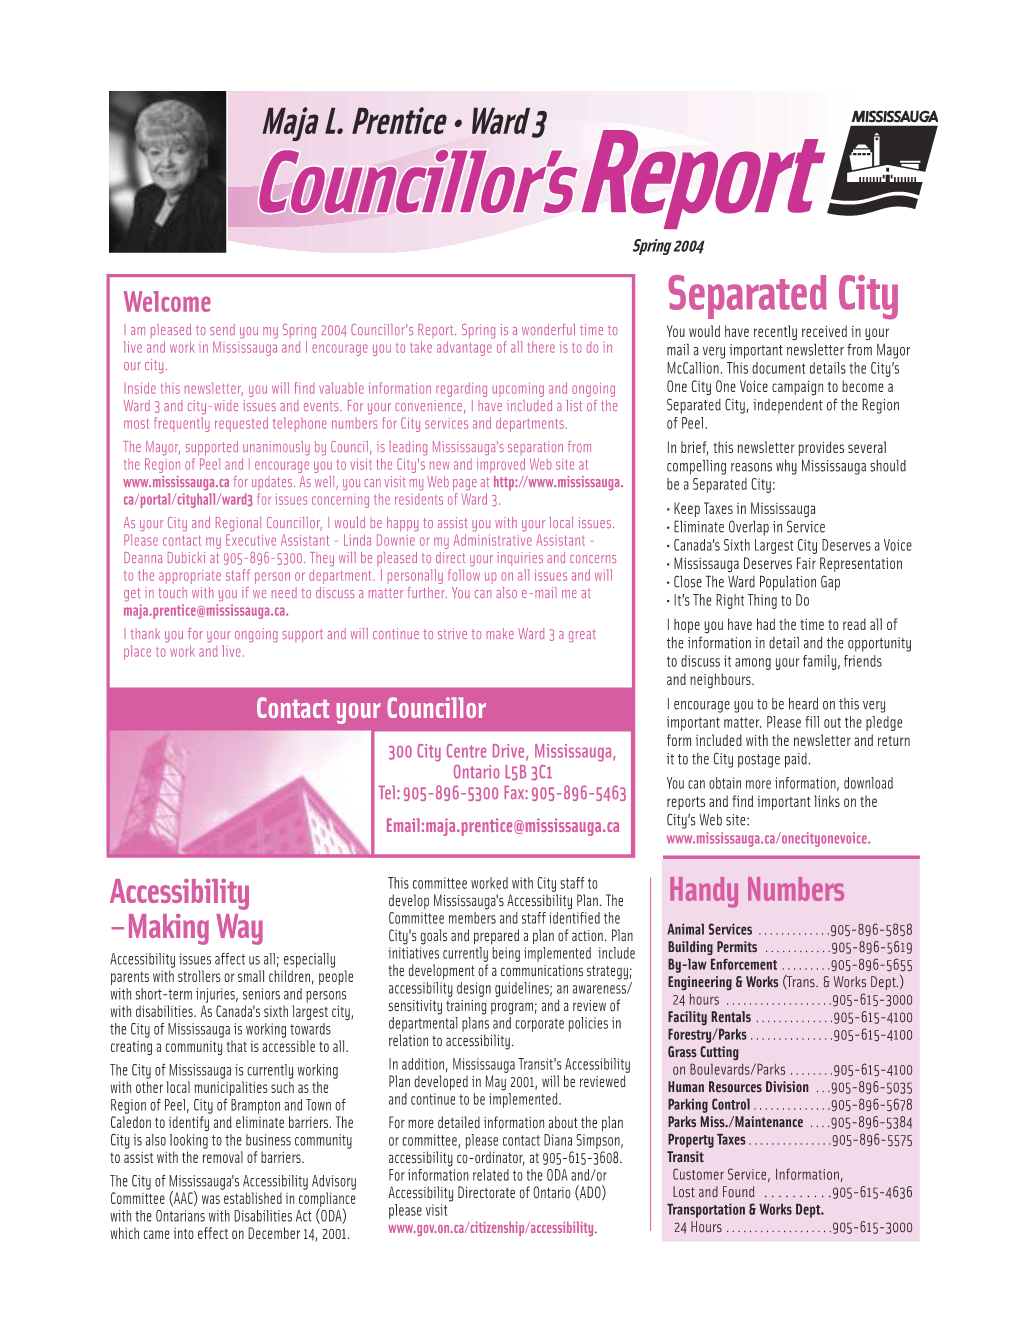 Separated City I Am Pleased to Send You My Spring 2004 Councillor's Report